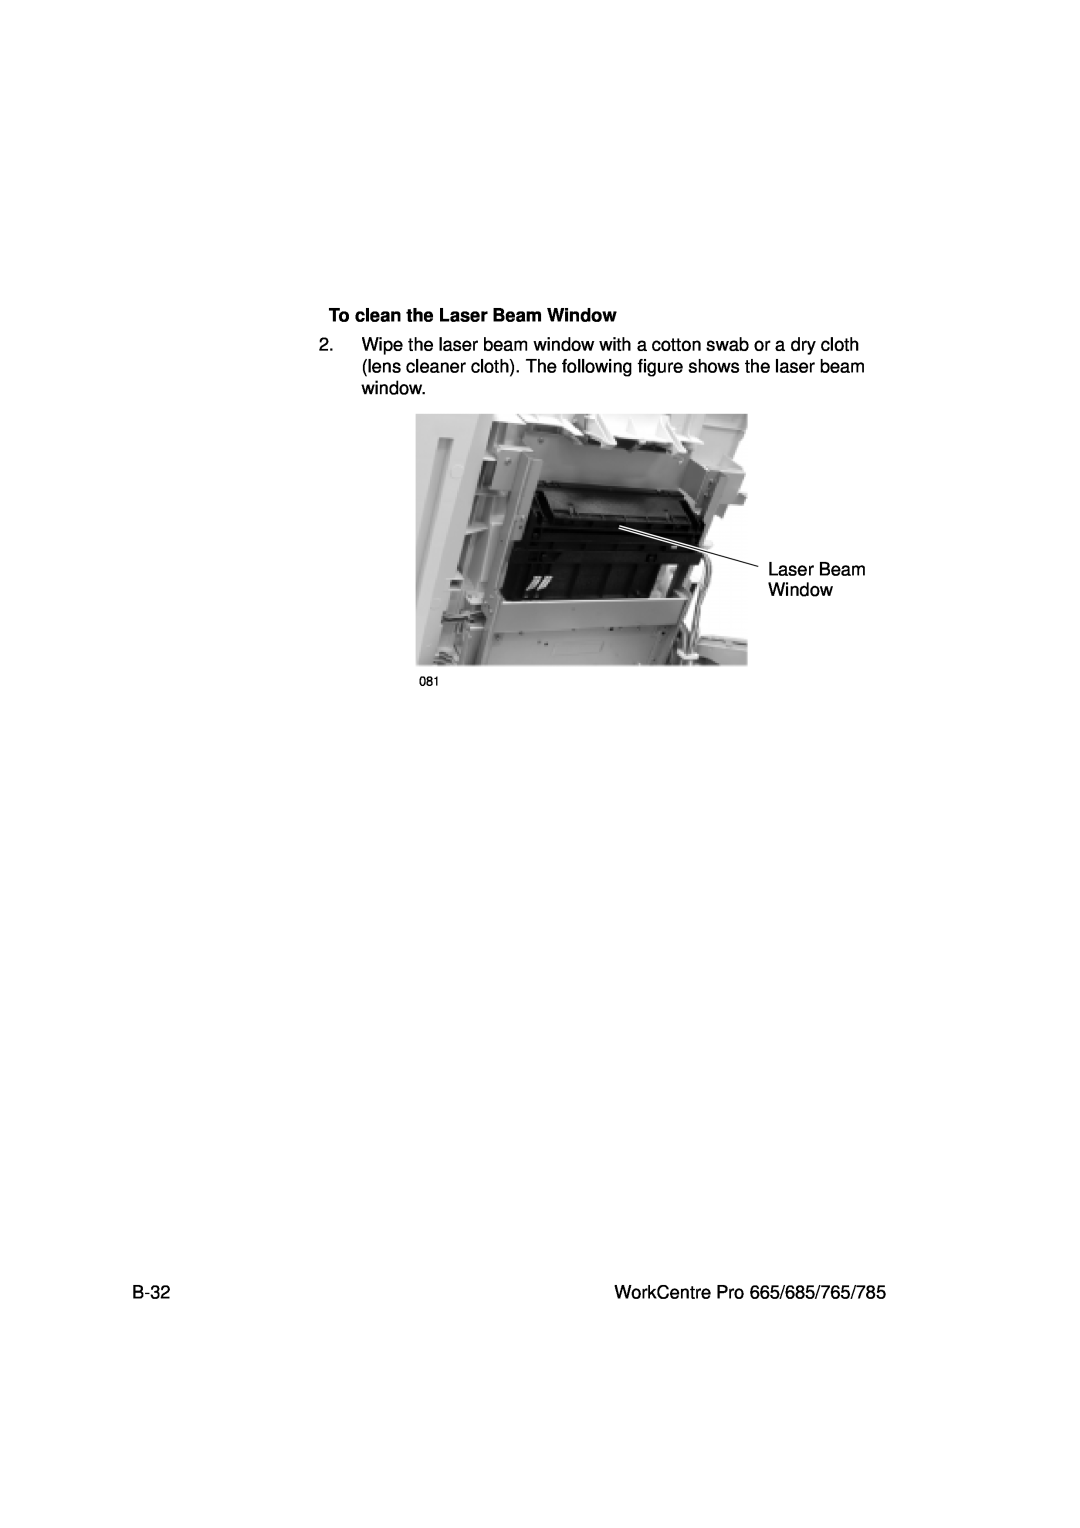 Xerox manual To clean the Laser Beam Window, B-32, WorkCentre Pro 665/685/765/785 